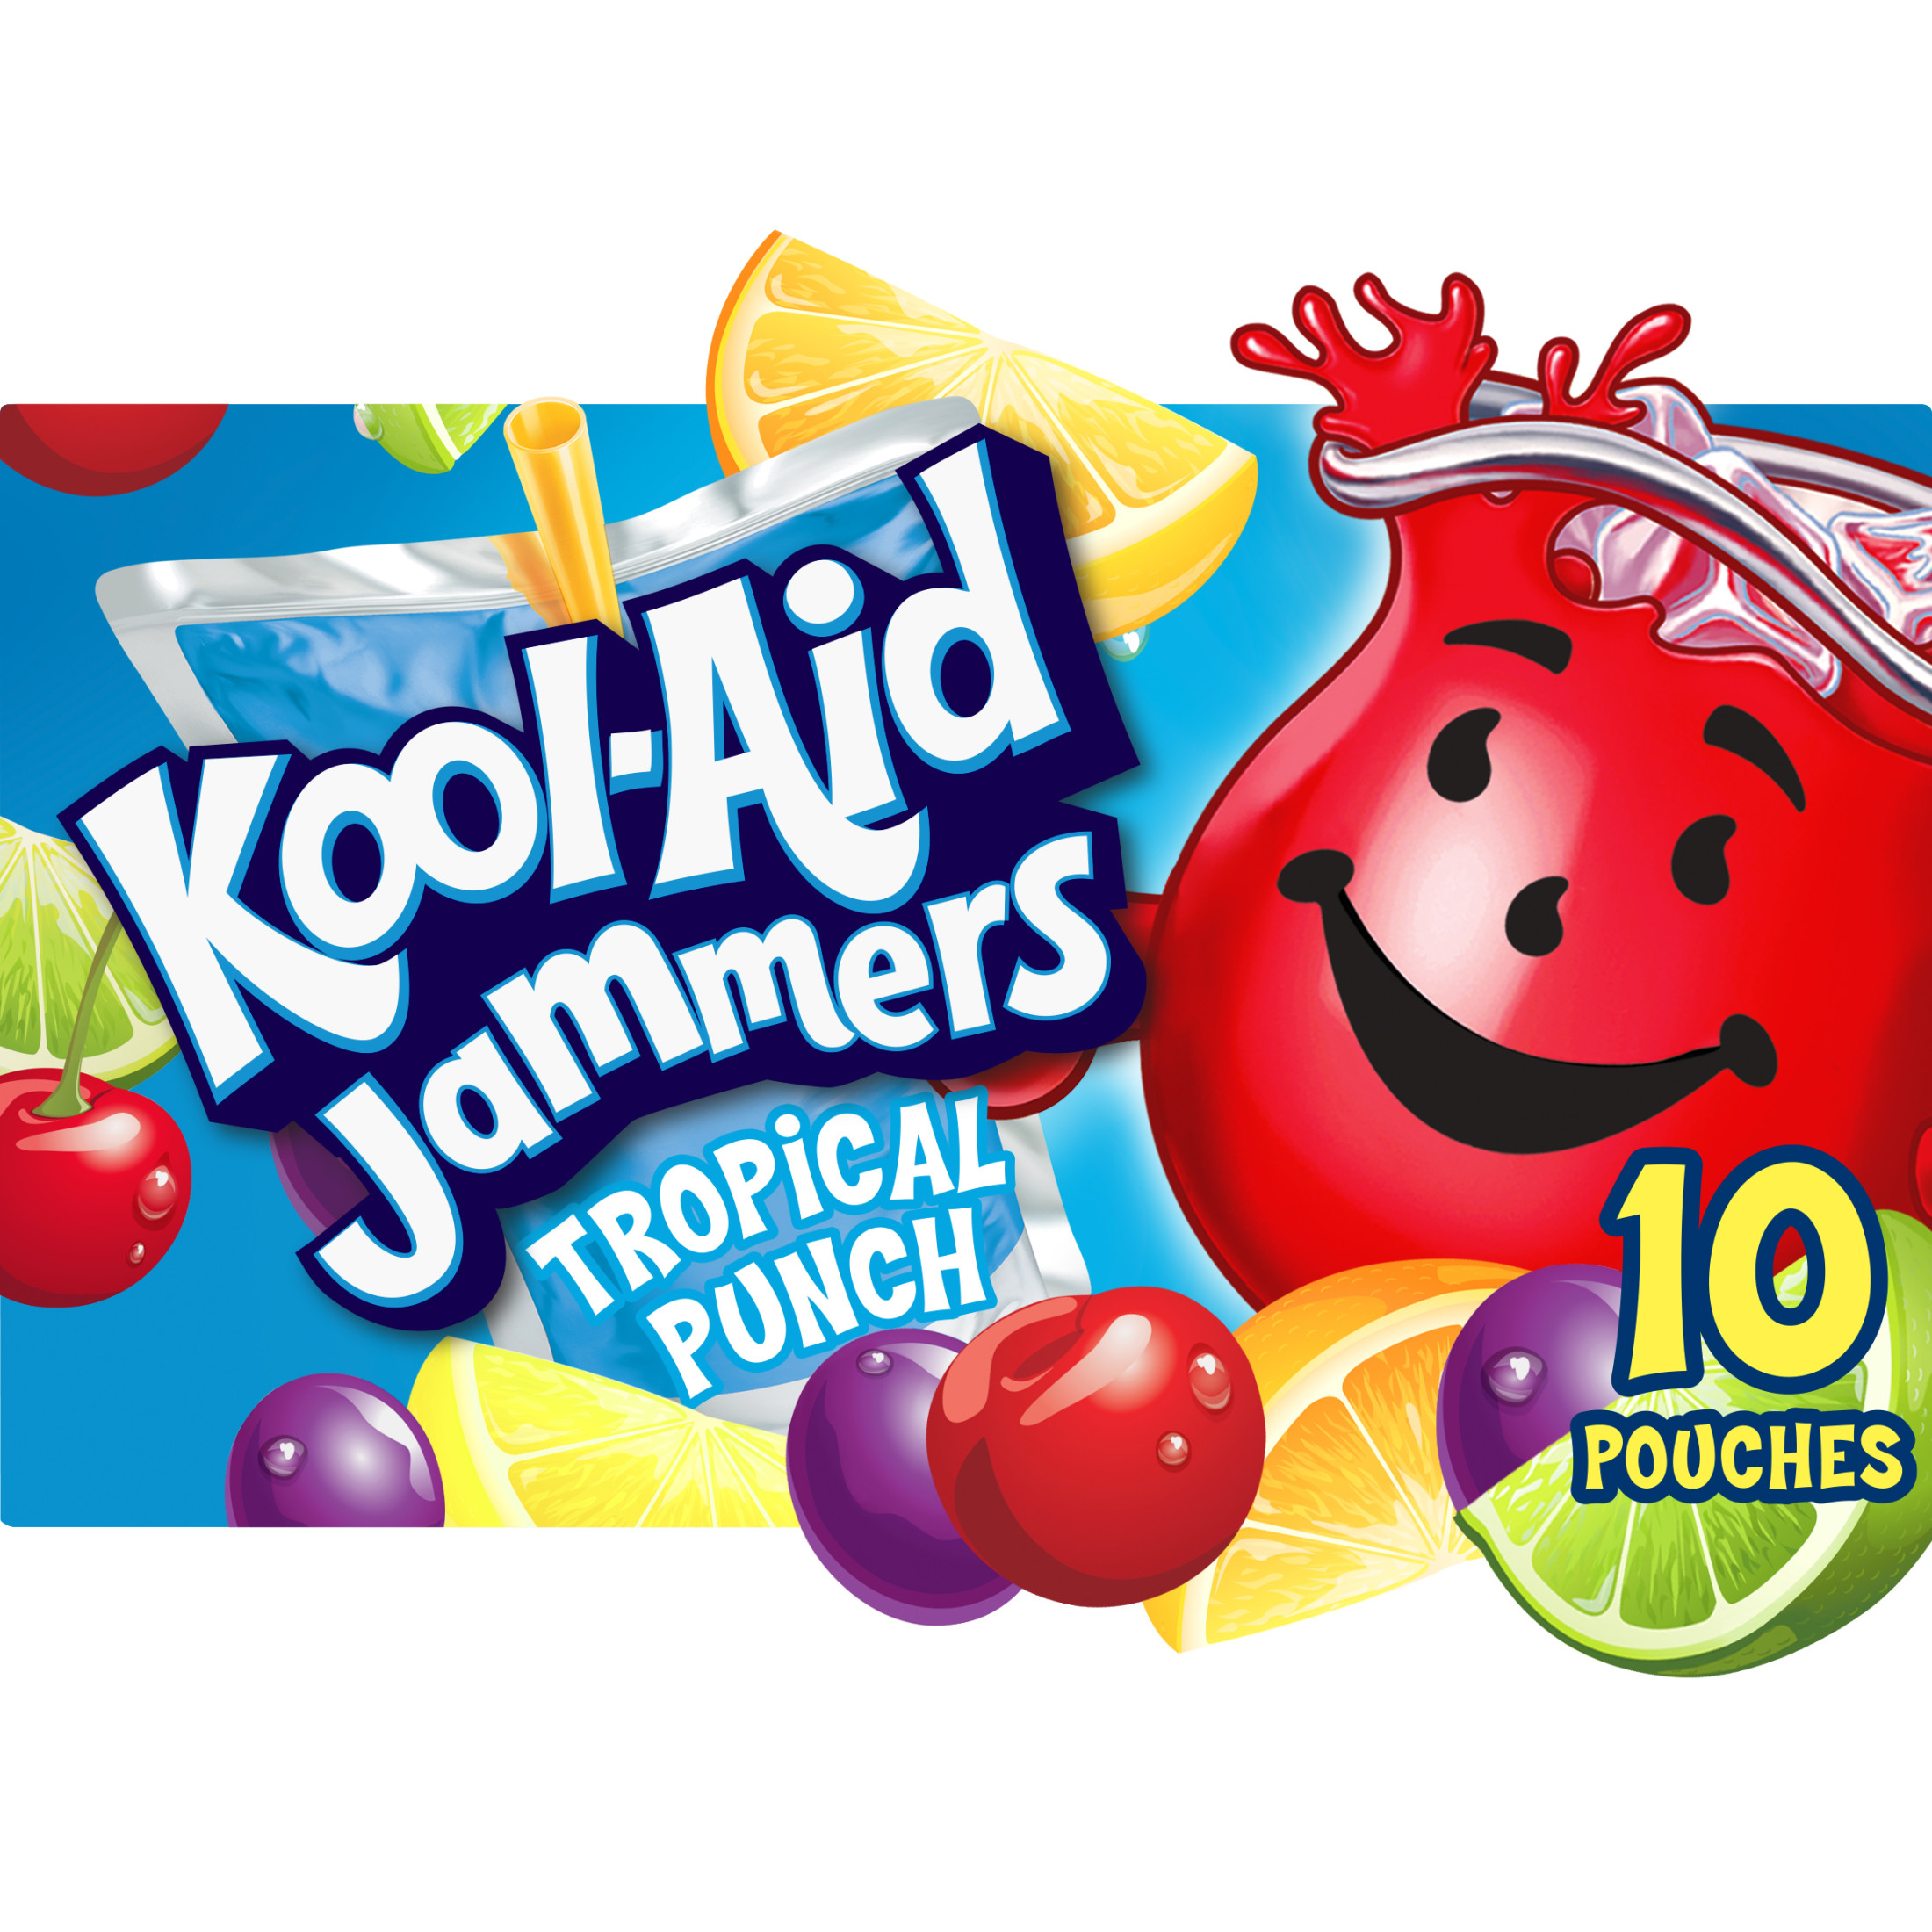 Kool Aid Jammers Tropical Punch Kids Drink 0% Juice Box Pouches, 10 Ct Box, 6 fl oz Pouches - image 1 of 7